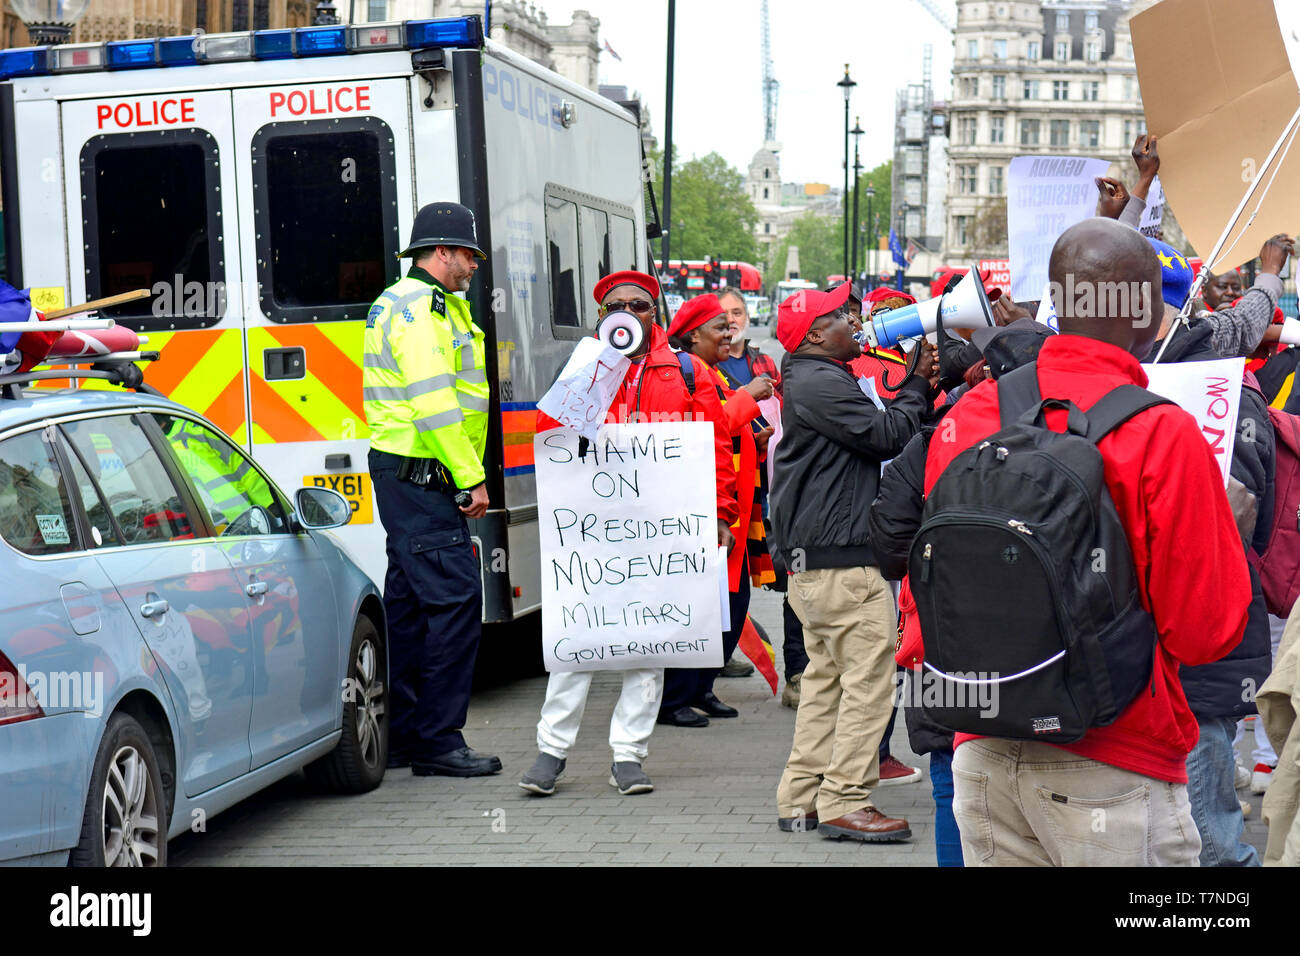 London, England, UK. Police interacting with protesters (against the Ugandan regime) in Westminster, May 2019 Stock Photo